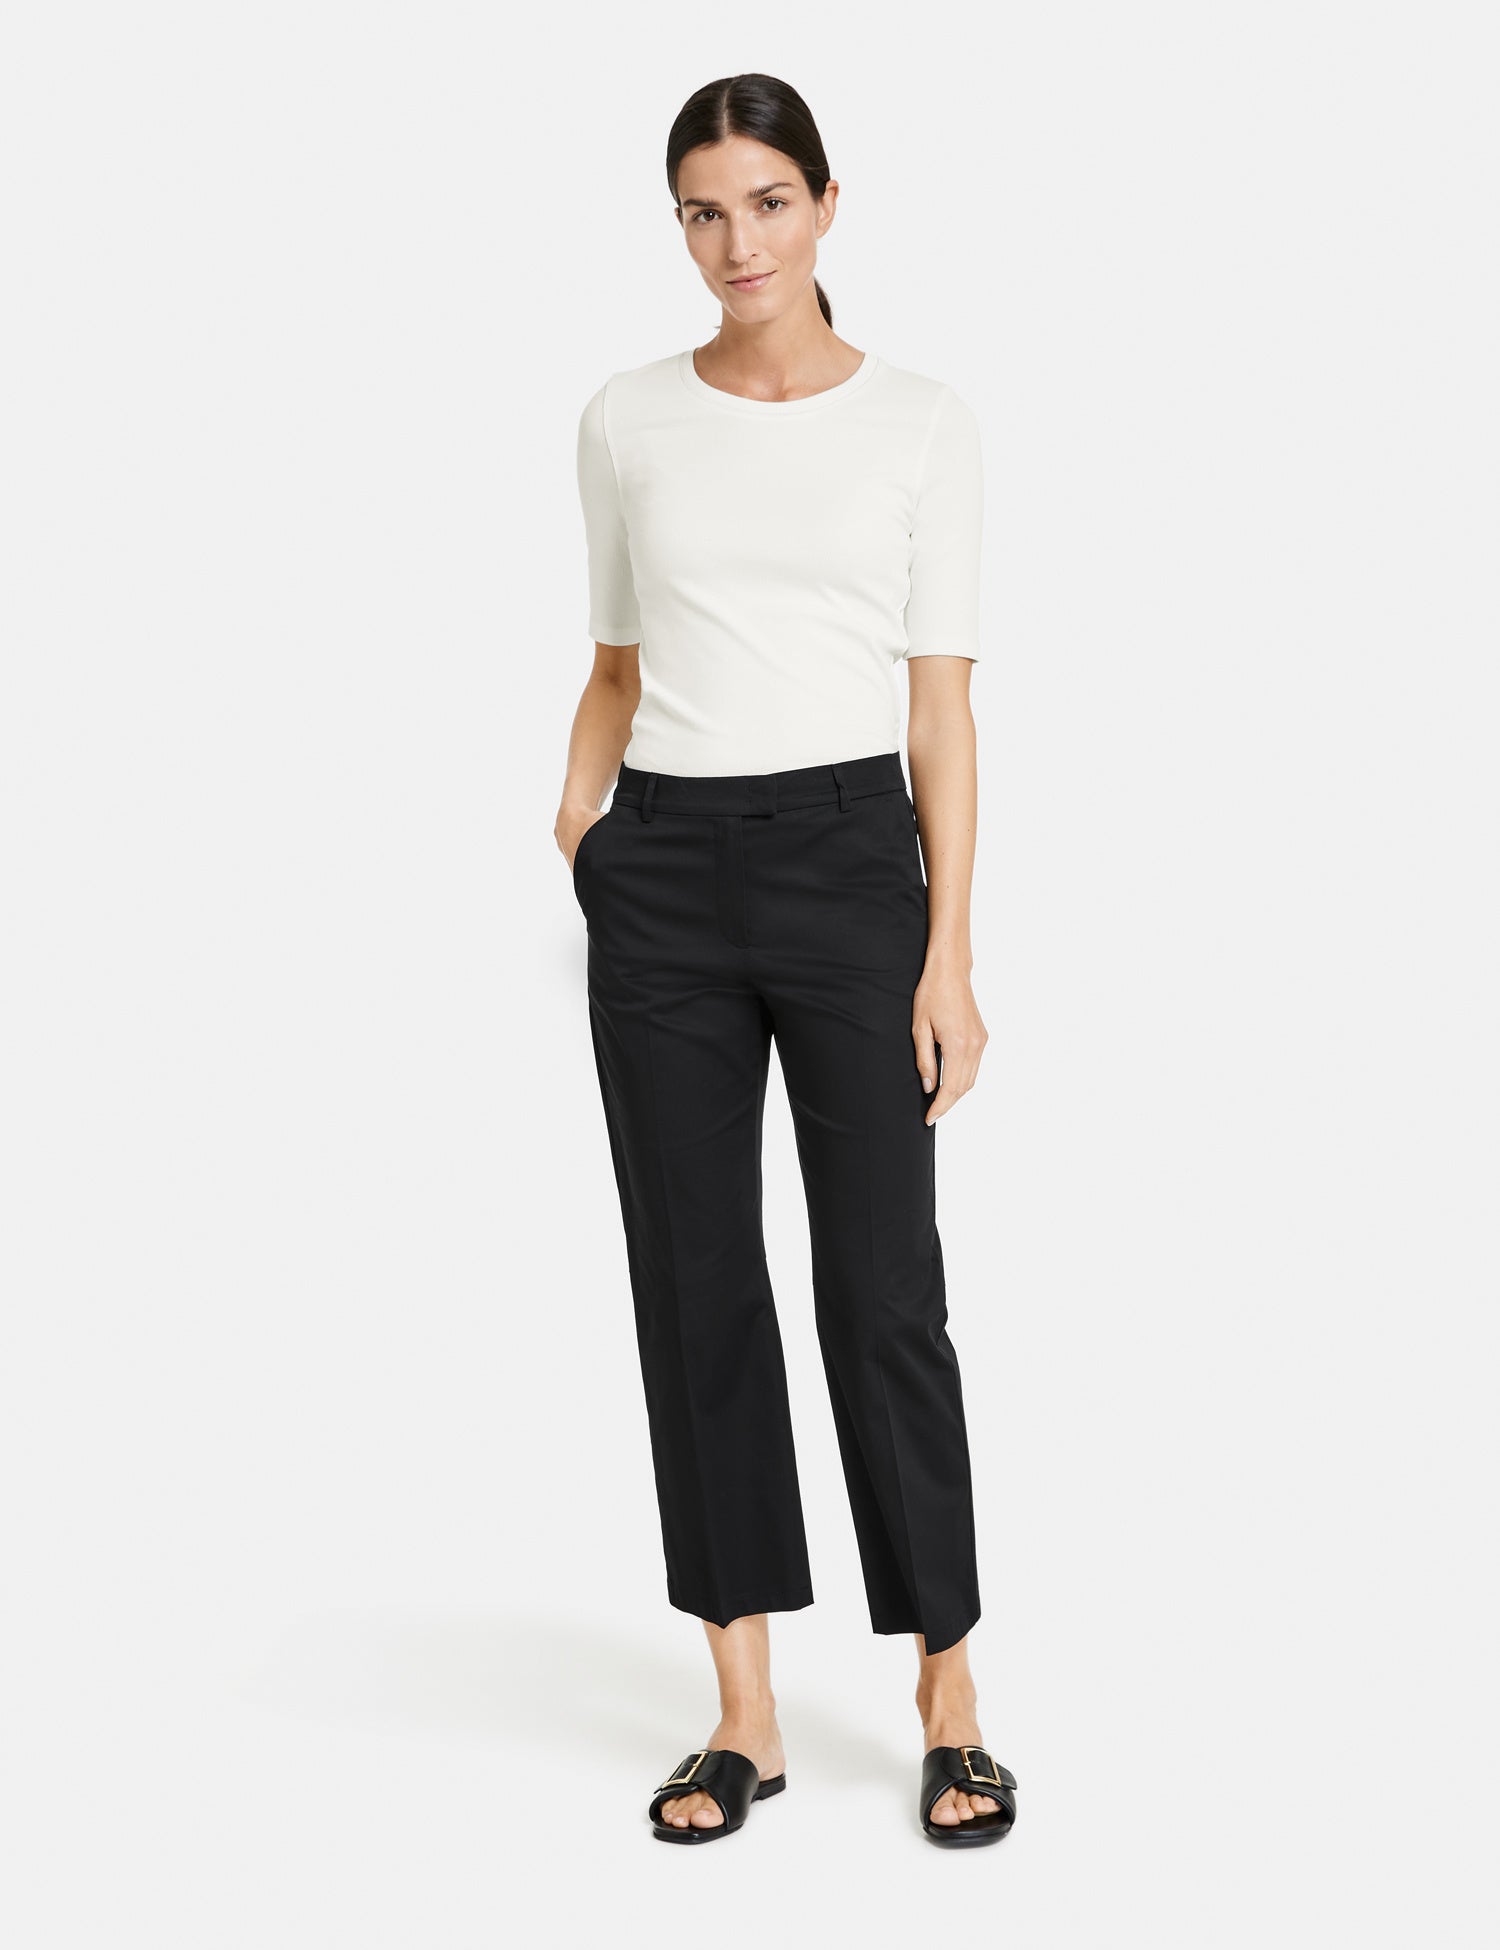 Gerry Weber Cotton pant in Sage